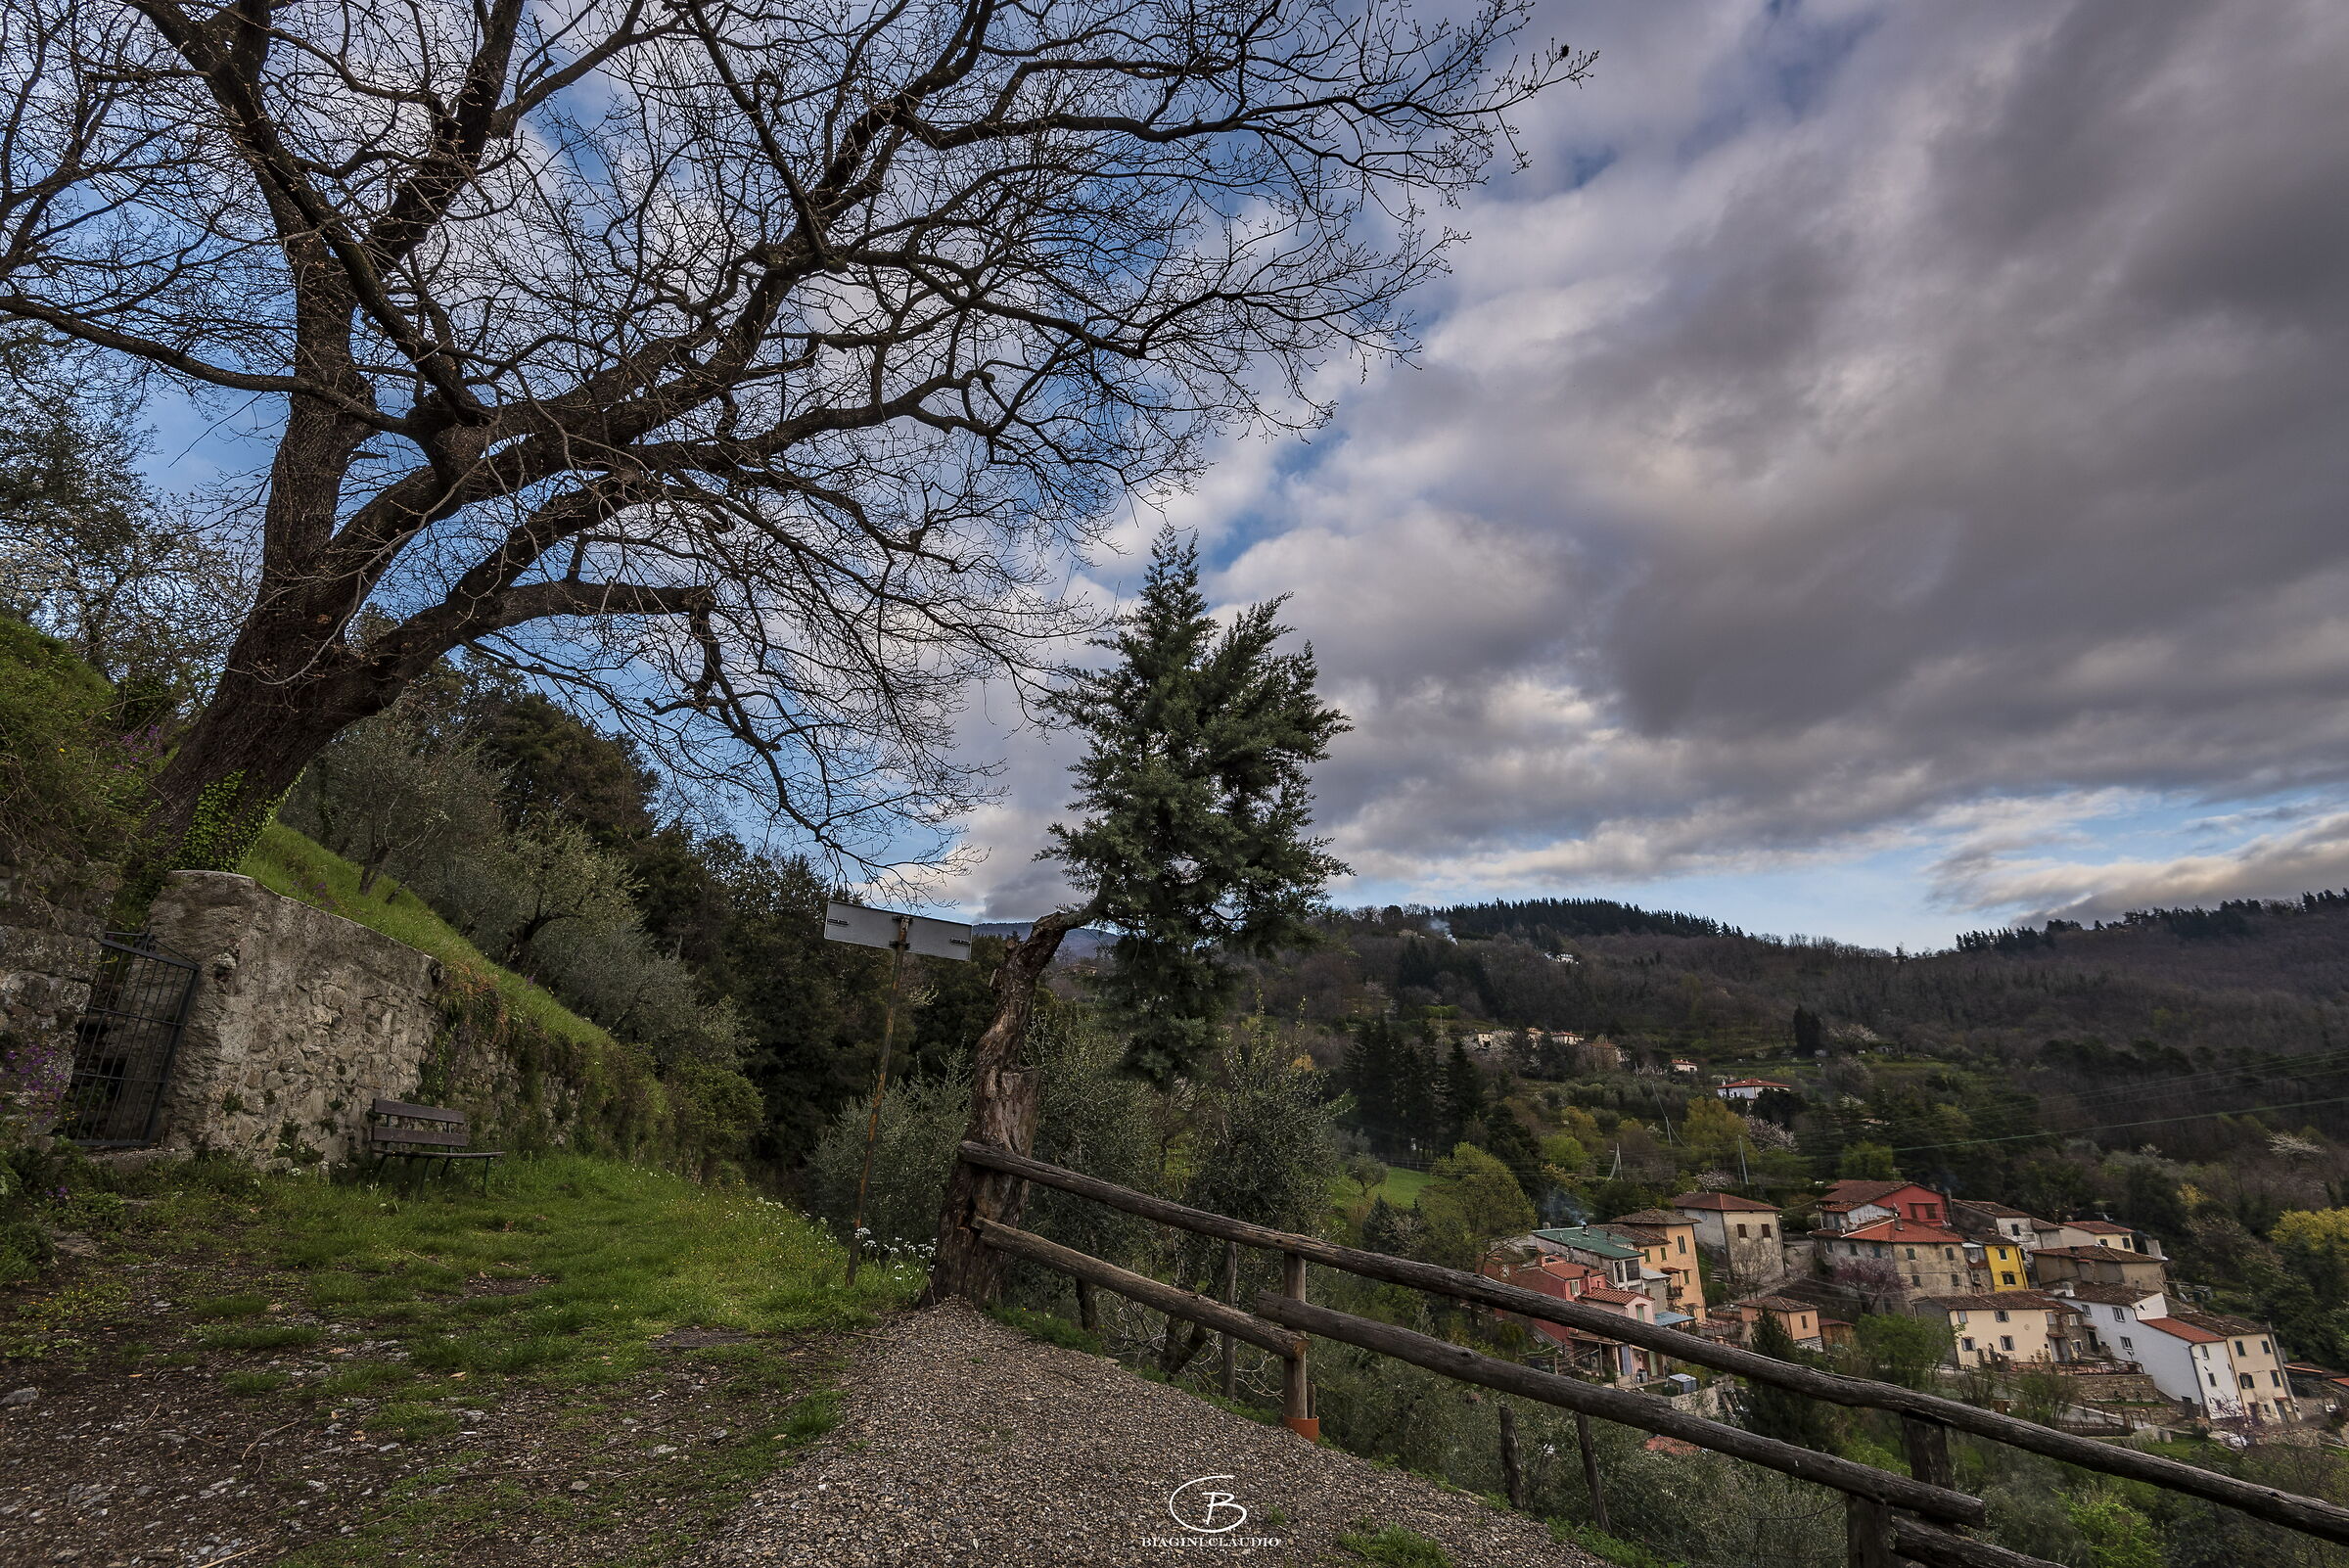 Photo taken from the village of "Fabbiana"...